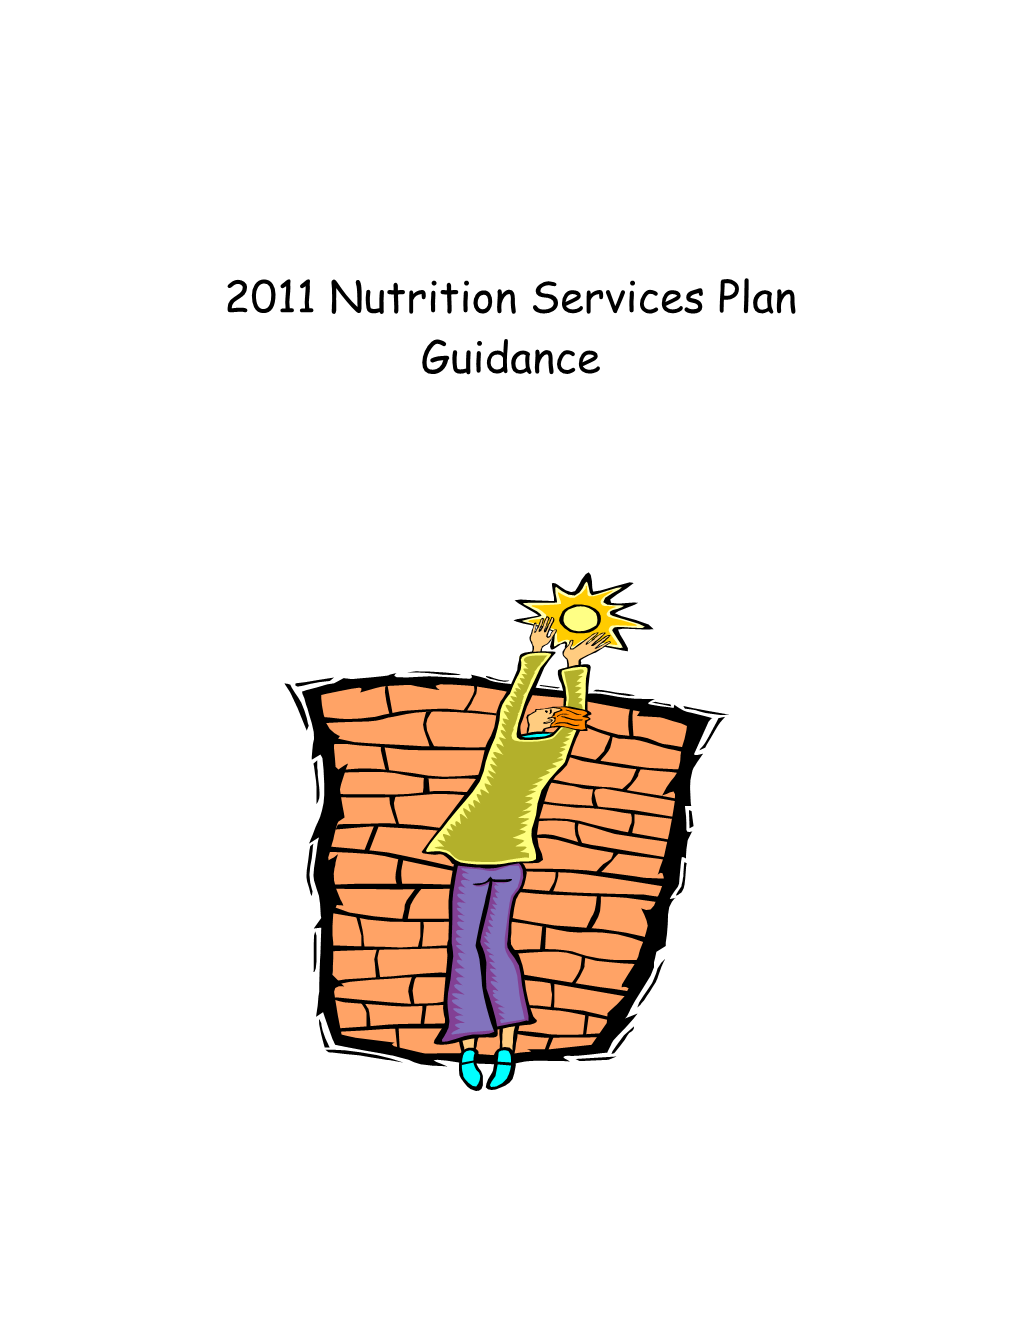 2009 Nutrition Services Plan Guidance